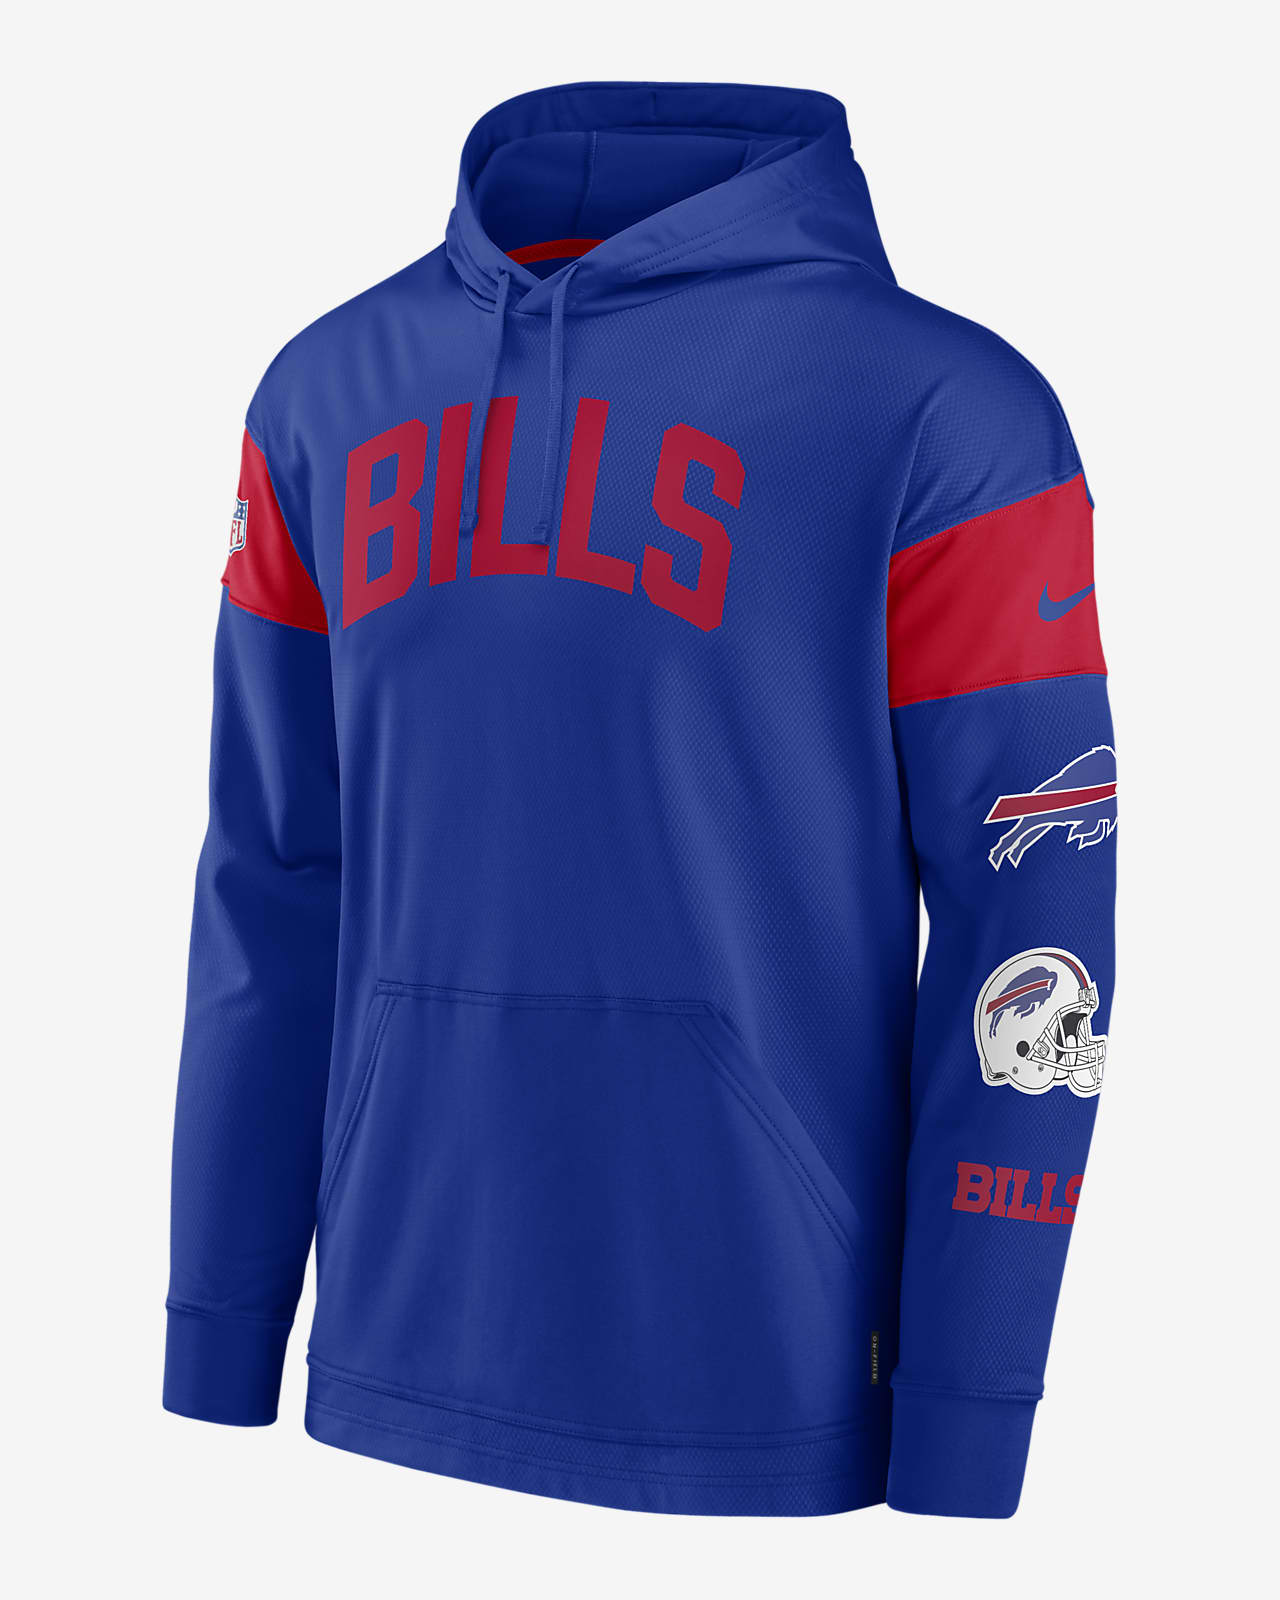 Nike Dri-FIT Athletic Arch Jersey (NFL Buffalo Bills) Men's Pullover Hoodie